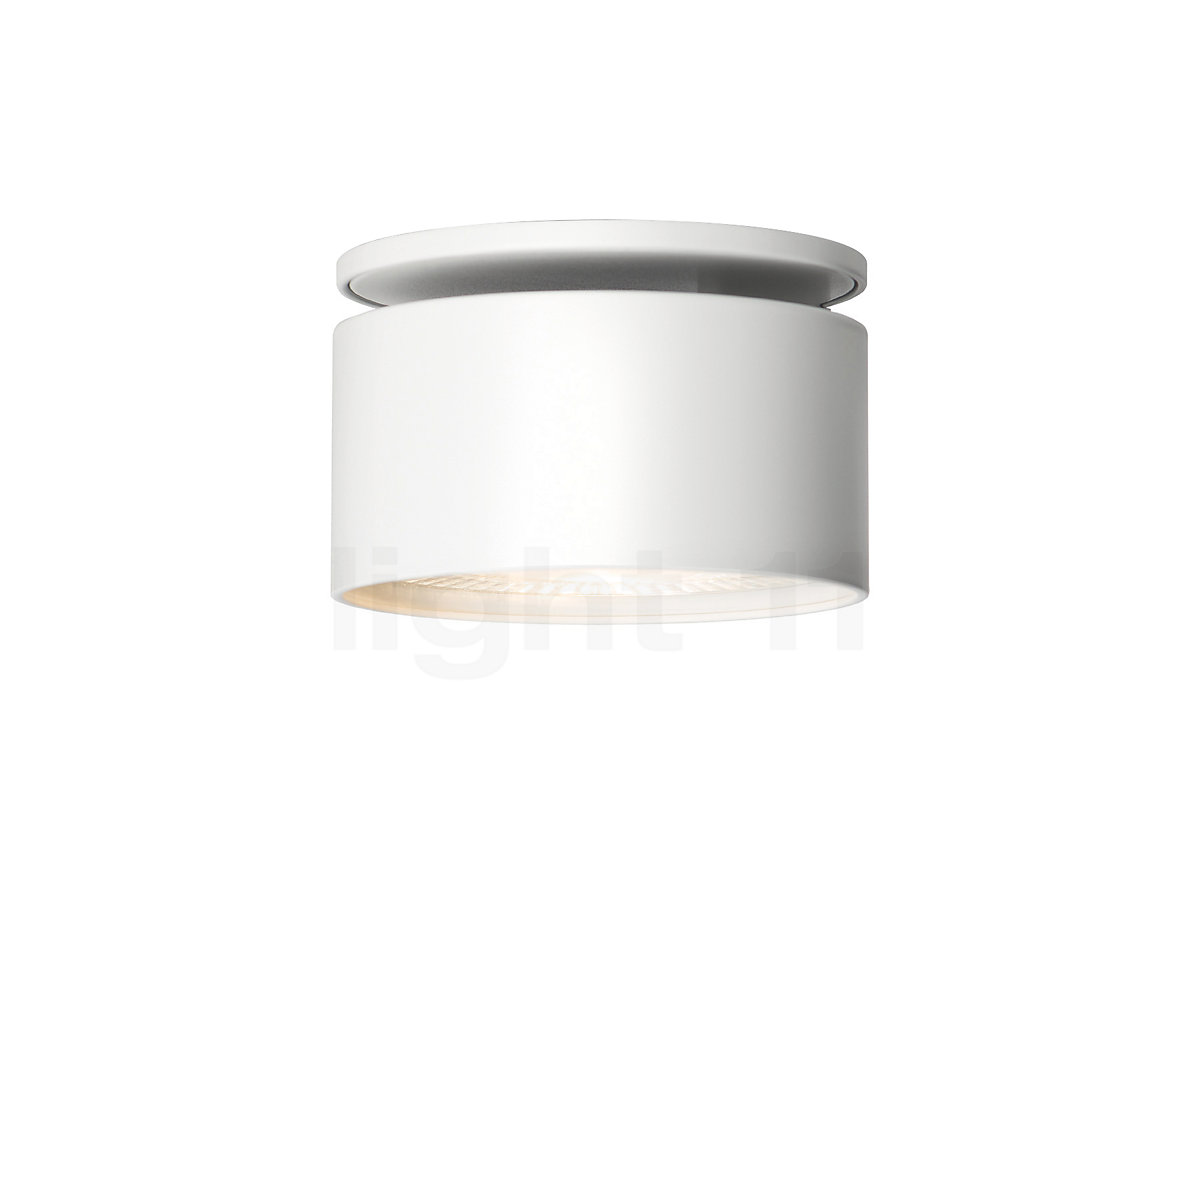 Buy Mawa Wittenberg 4 0 Recessed Ceiling Light Round With Cover